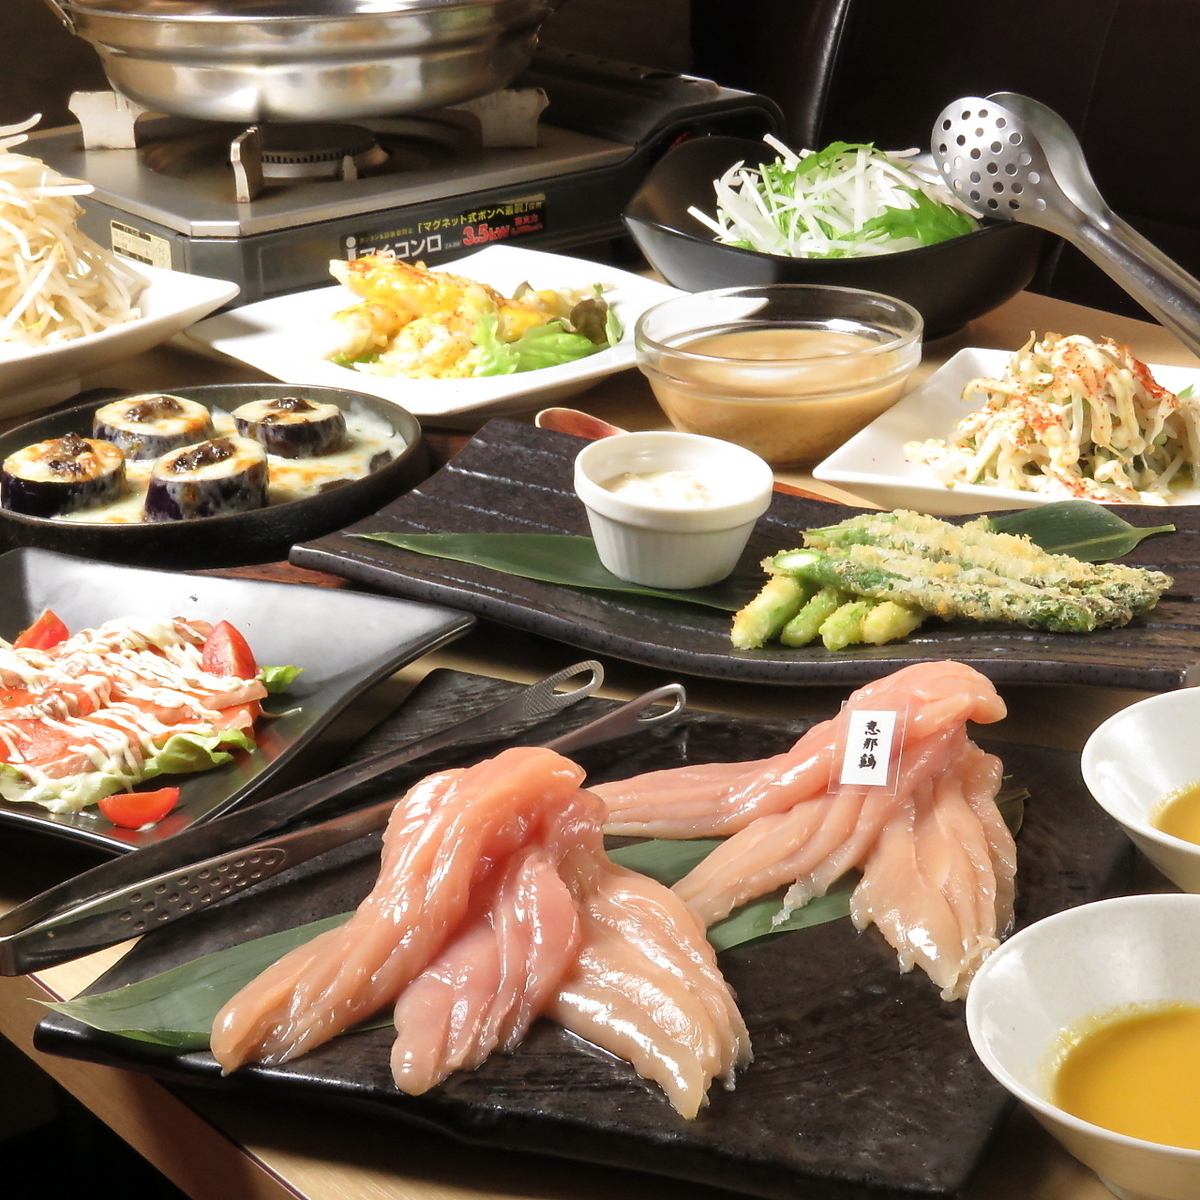 Various courses are also available, including Nagoya Cochin chicken fillet shabu-shabu.